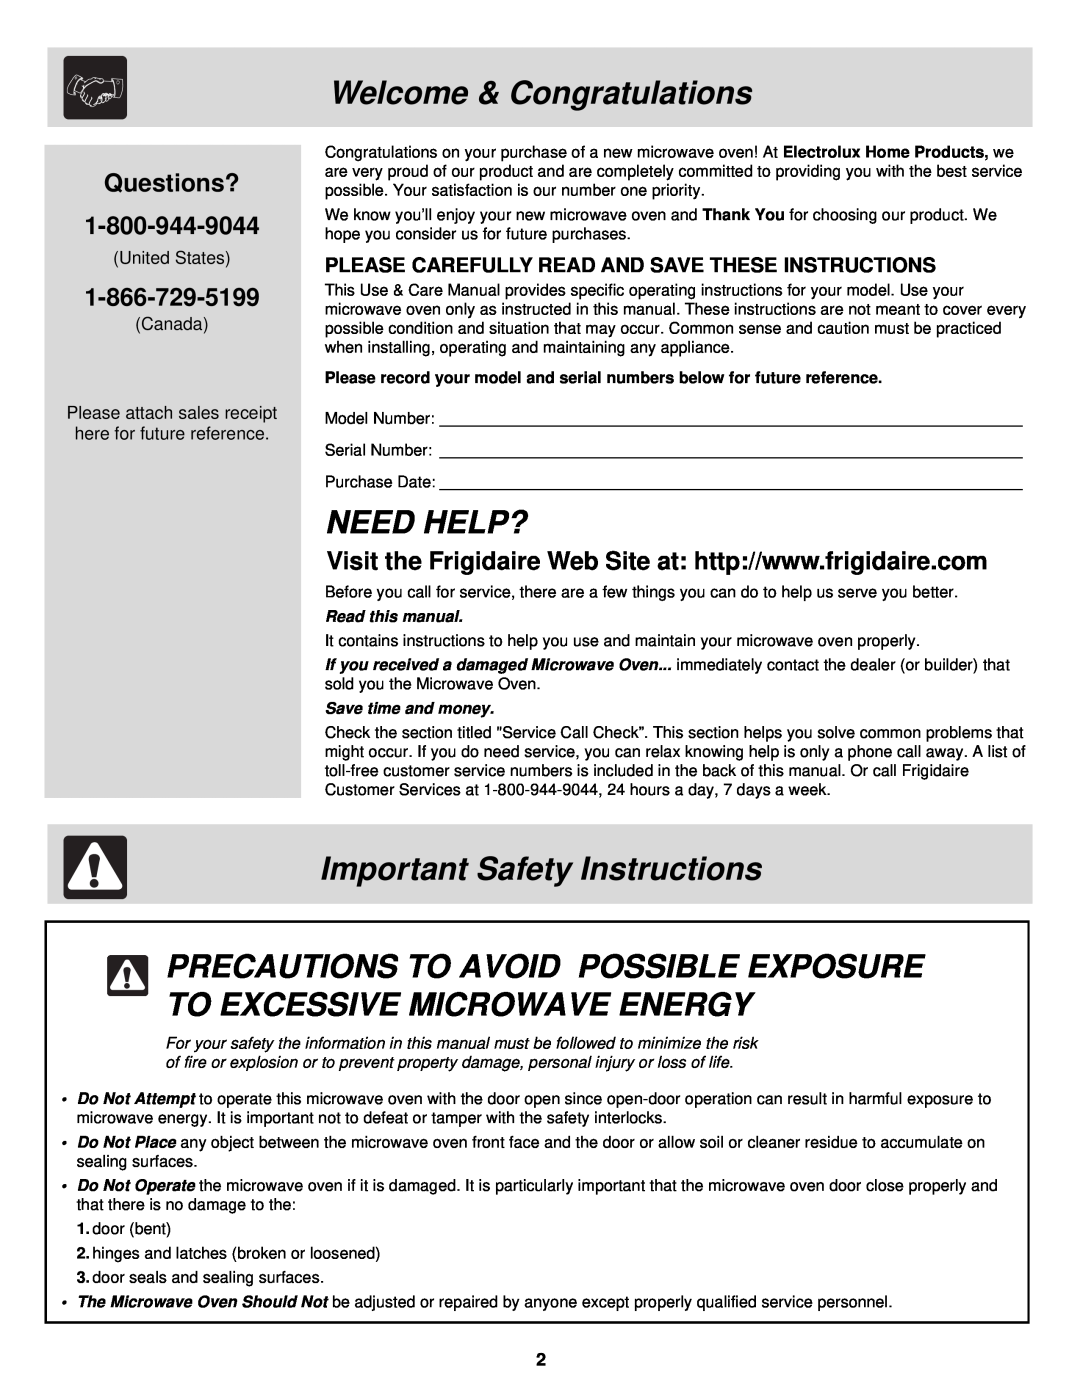 Frigidaire DQ, FMV156DB Welcome & Congratulations, Need Help?, Important Safety Instructions, Questions?, Read this manual 